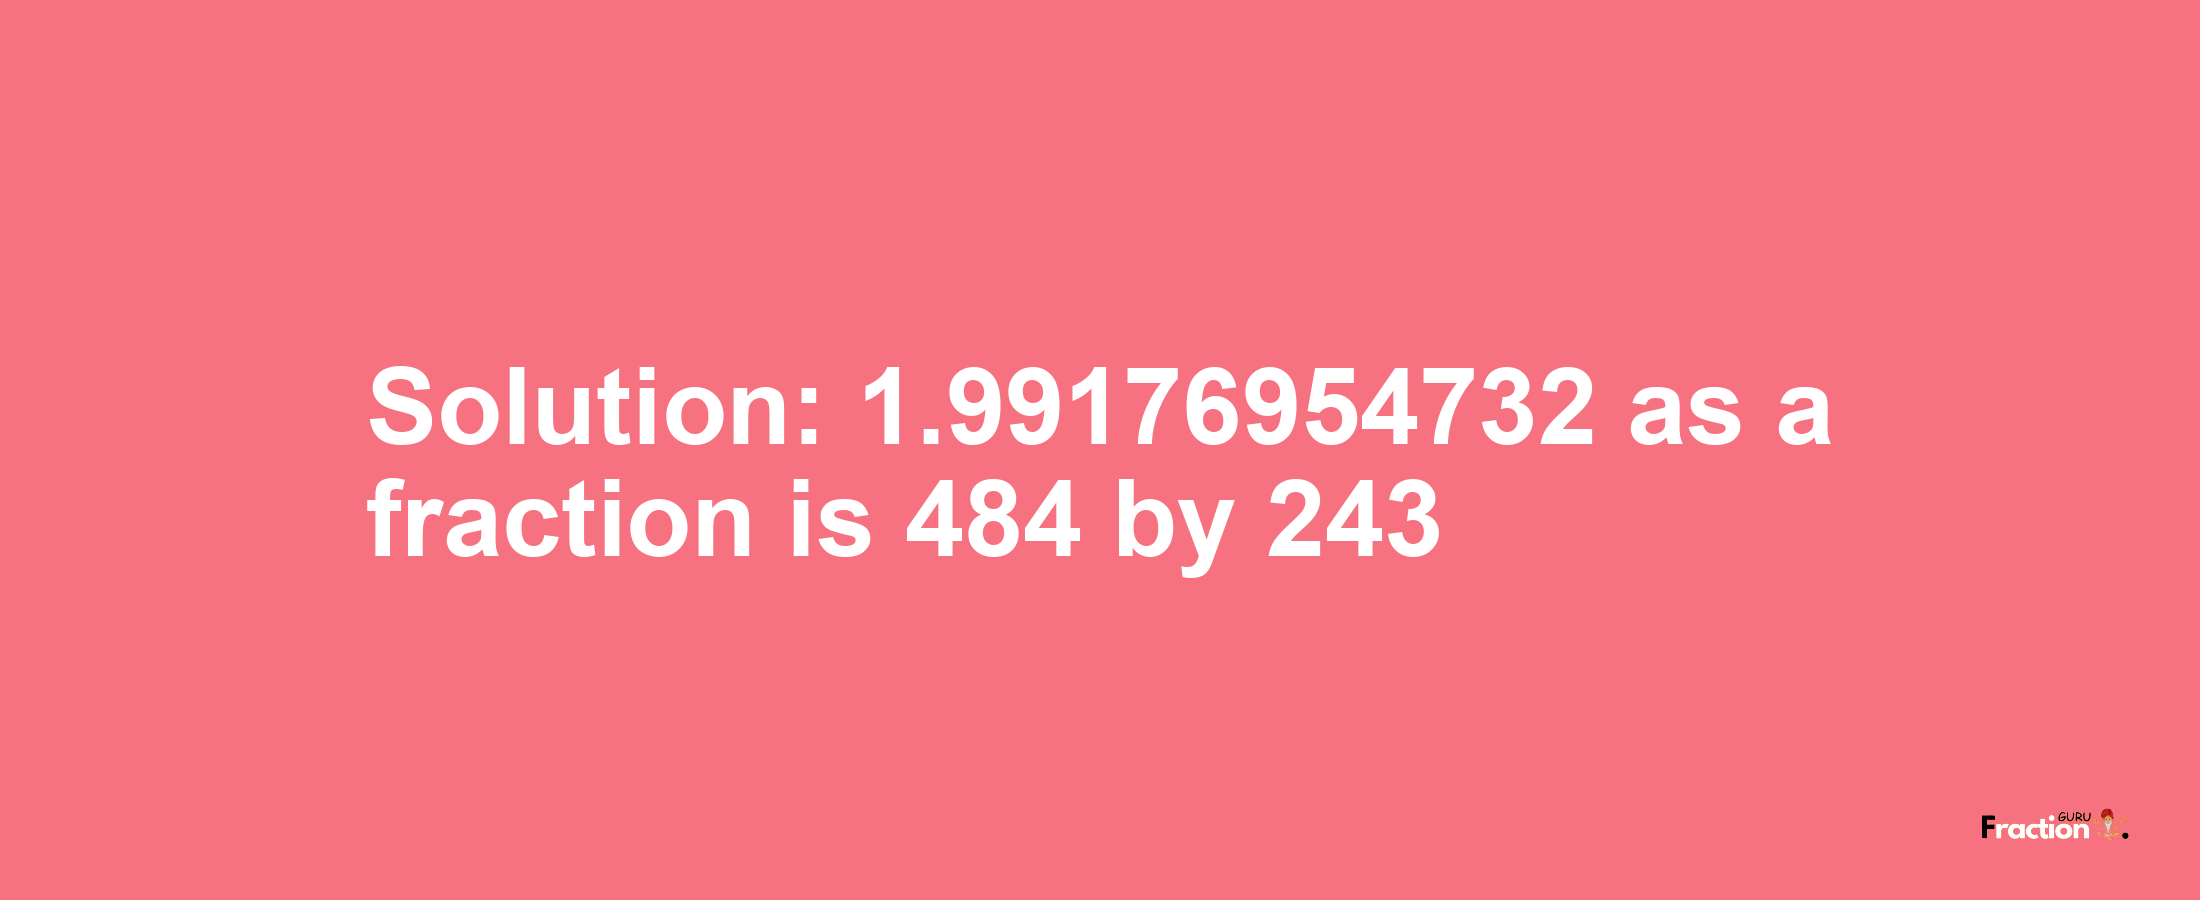 Solution:1.99176954732 as a fraction is 484/243